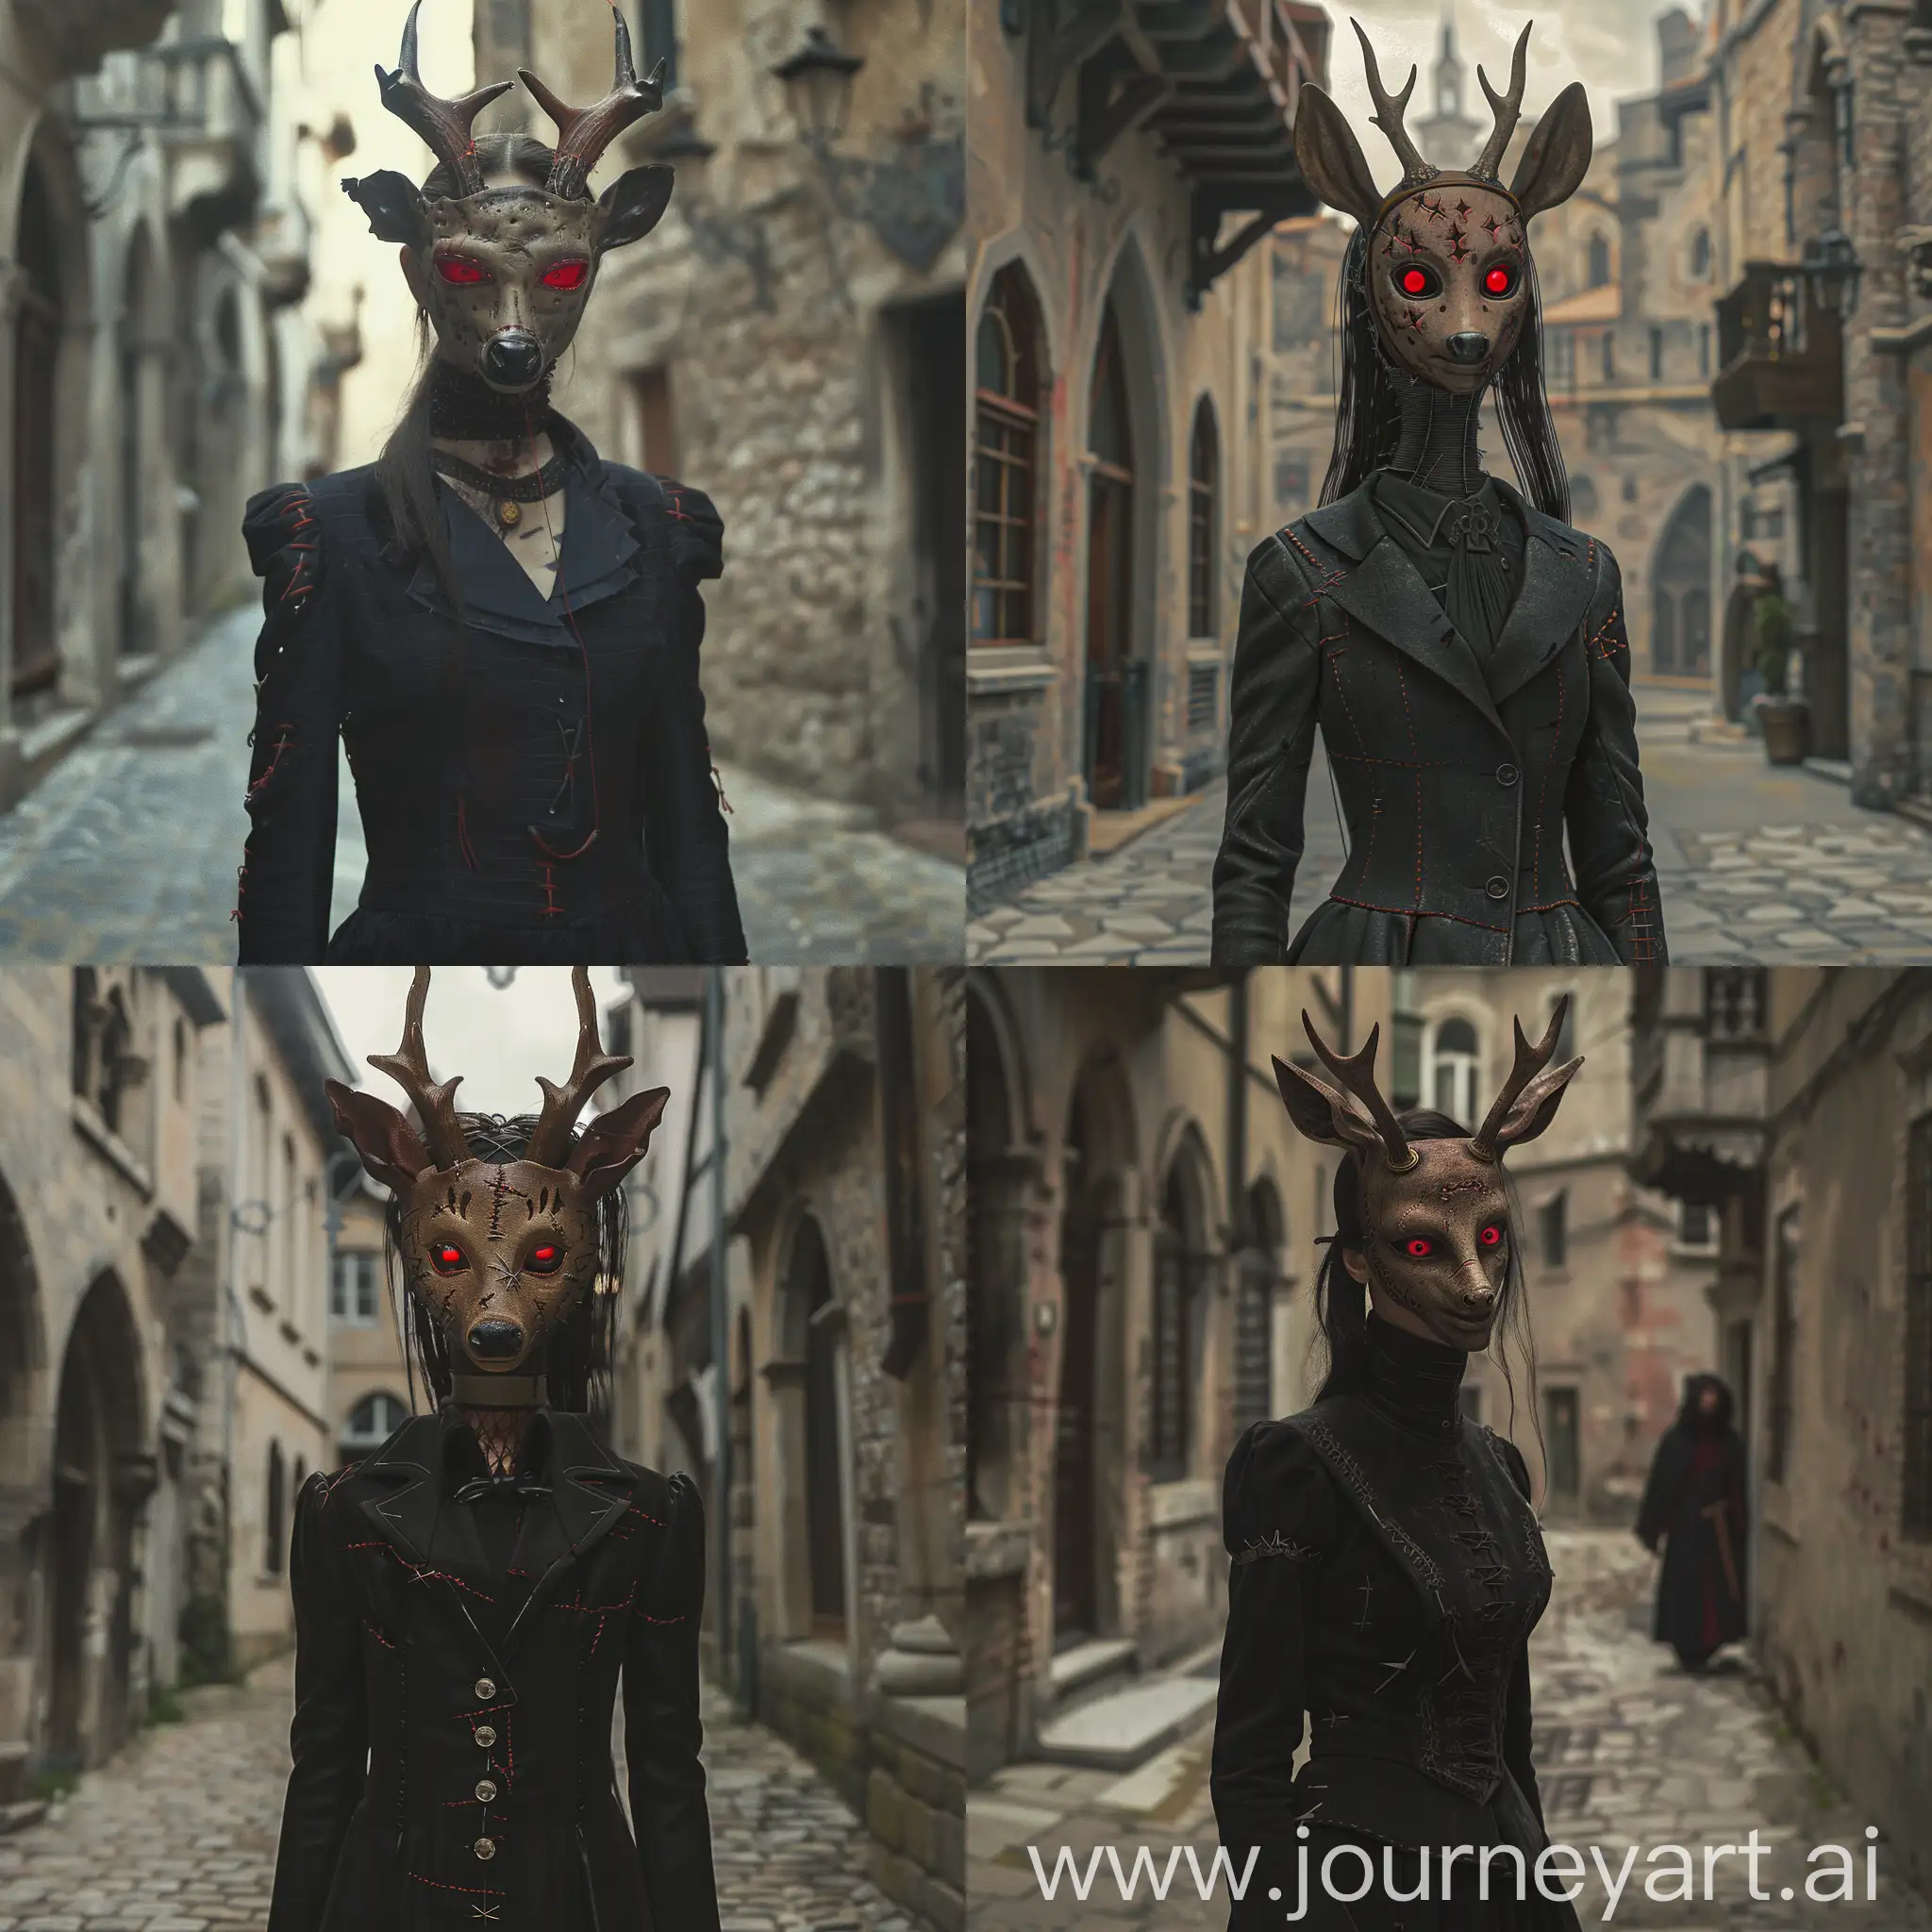 red eyes, brunette, whole body in scars and stitches, 2 meters tall, dressed in an aristocratic suit, black color, deer mask, monk, in a medieval city